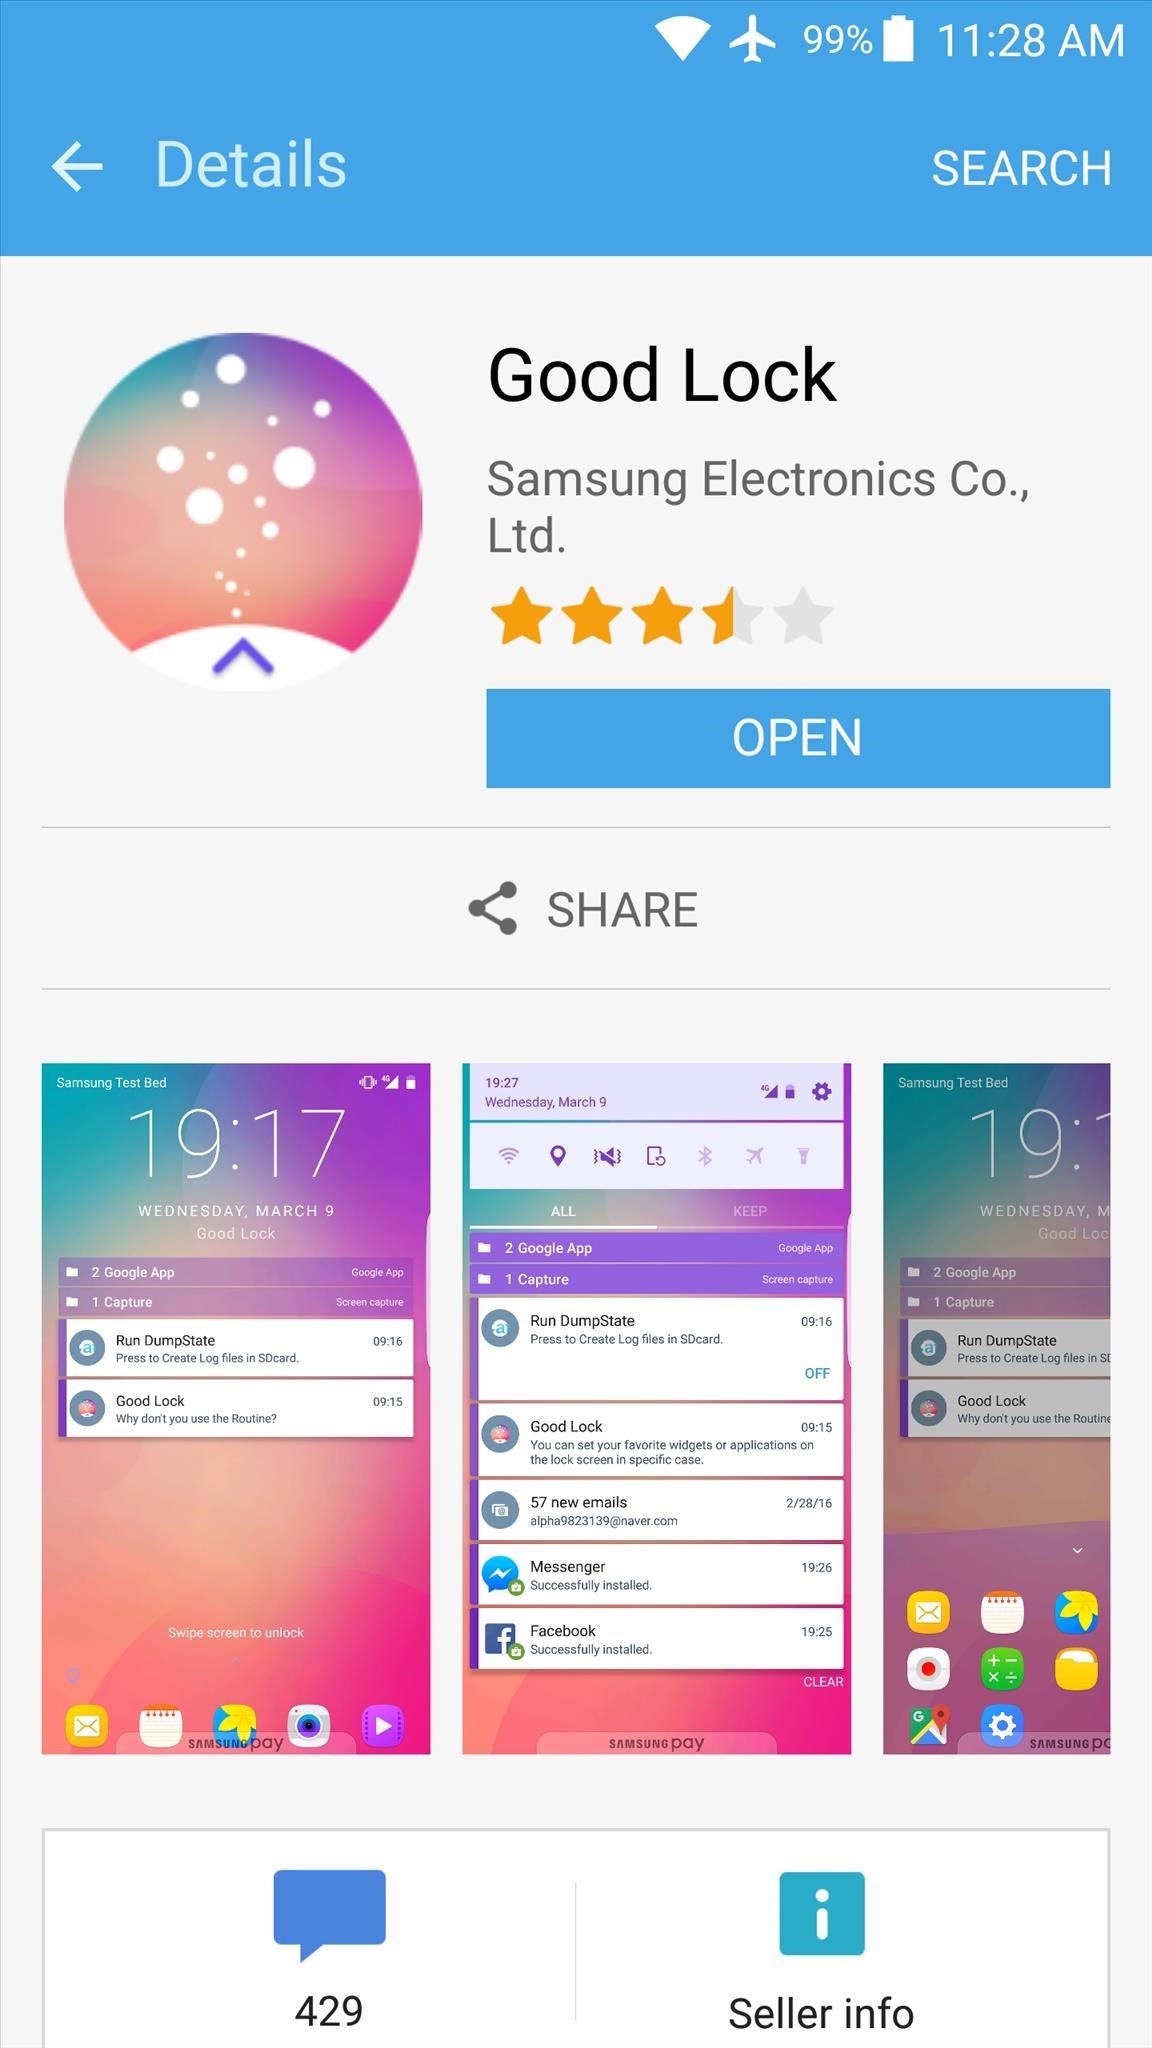 Samsung's Hidden App Lets You Drastically Change Your Galaxy's Look